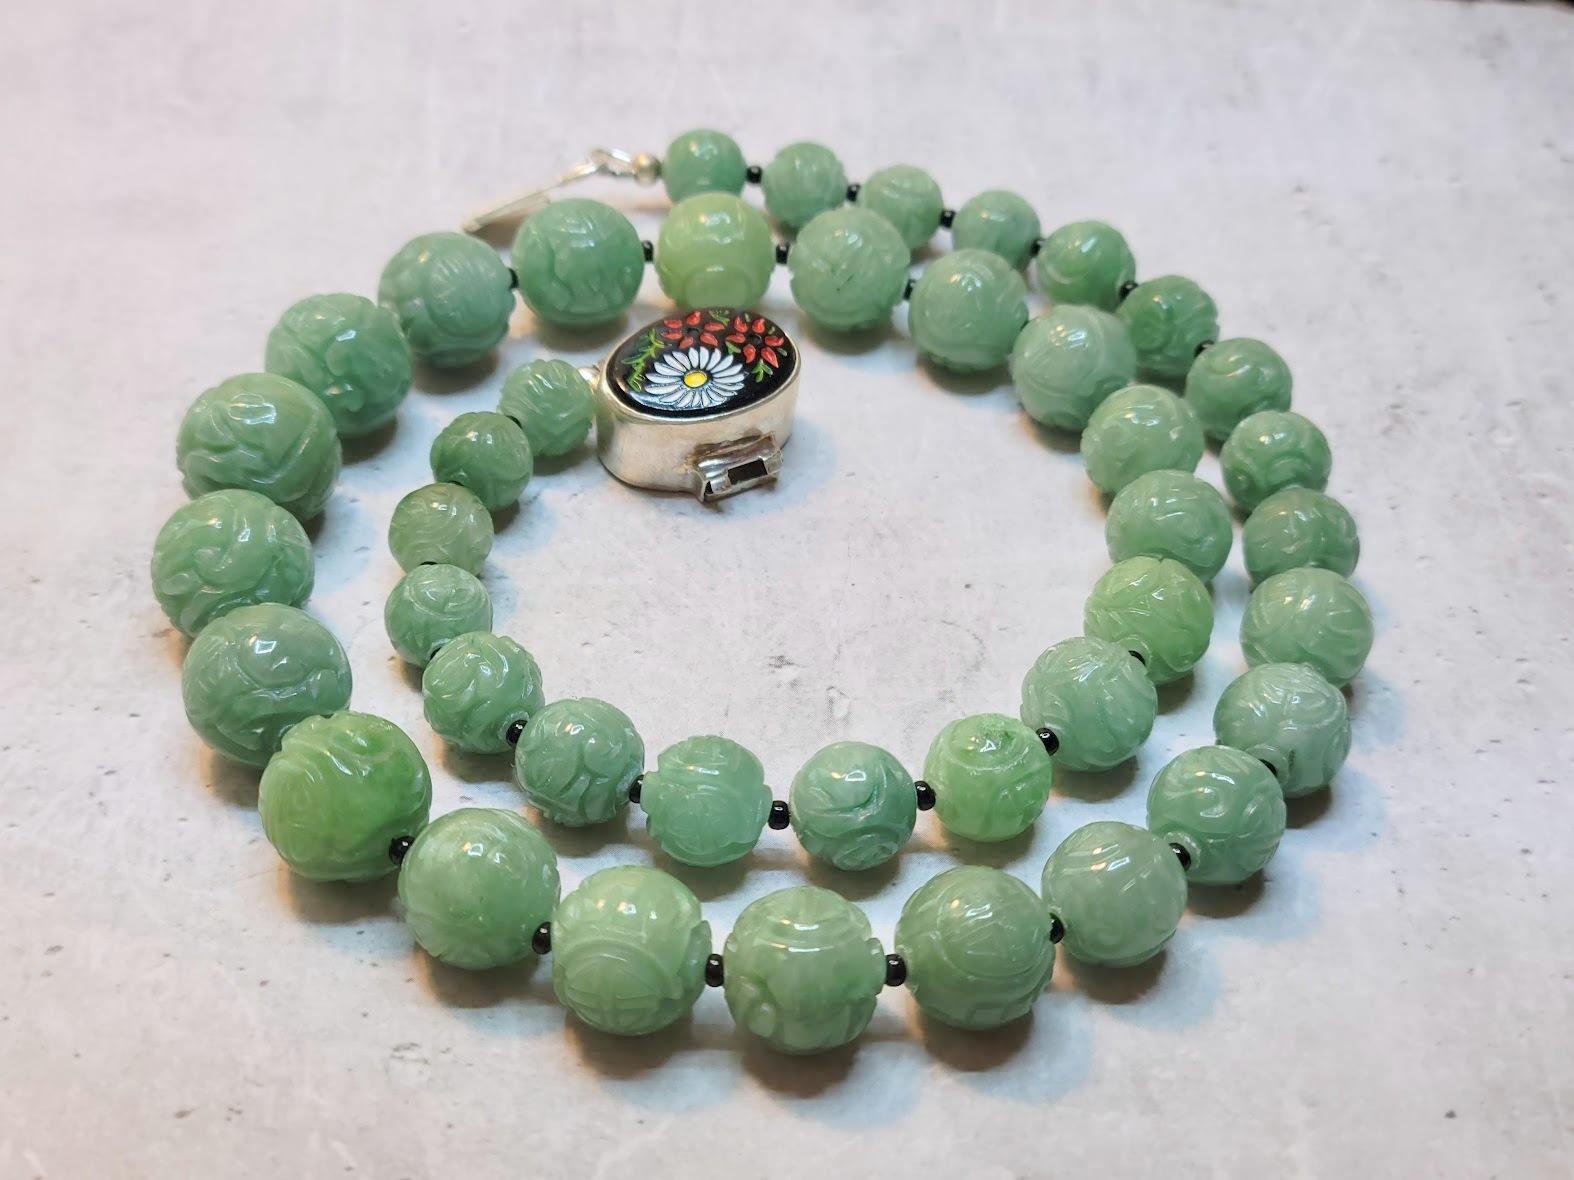 A gorgeous necklace of old green jade beads and vintage tiny seed glass beads with a vintage, unique silver clasp. The shou symbol & floral motif are carved in the beads. The shou represents longevity.

The length of the necklace is 20.5 inches (52